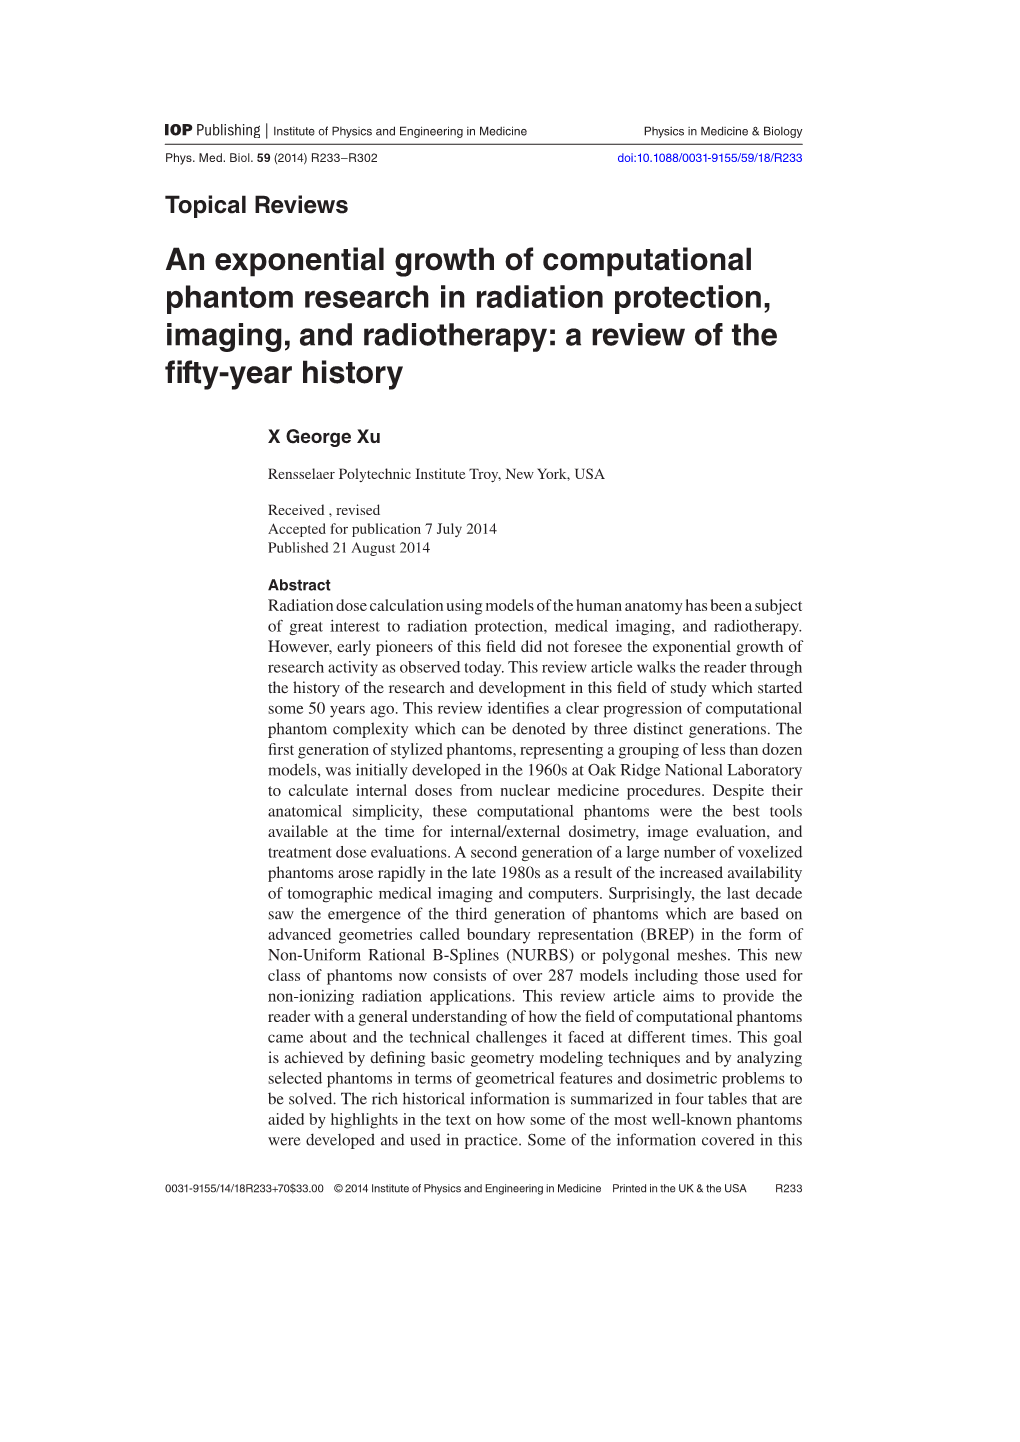 An Exponential Growth of Computational Phantom Research in Radiation Protection, Imaging, and Radiotherapy